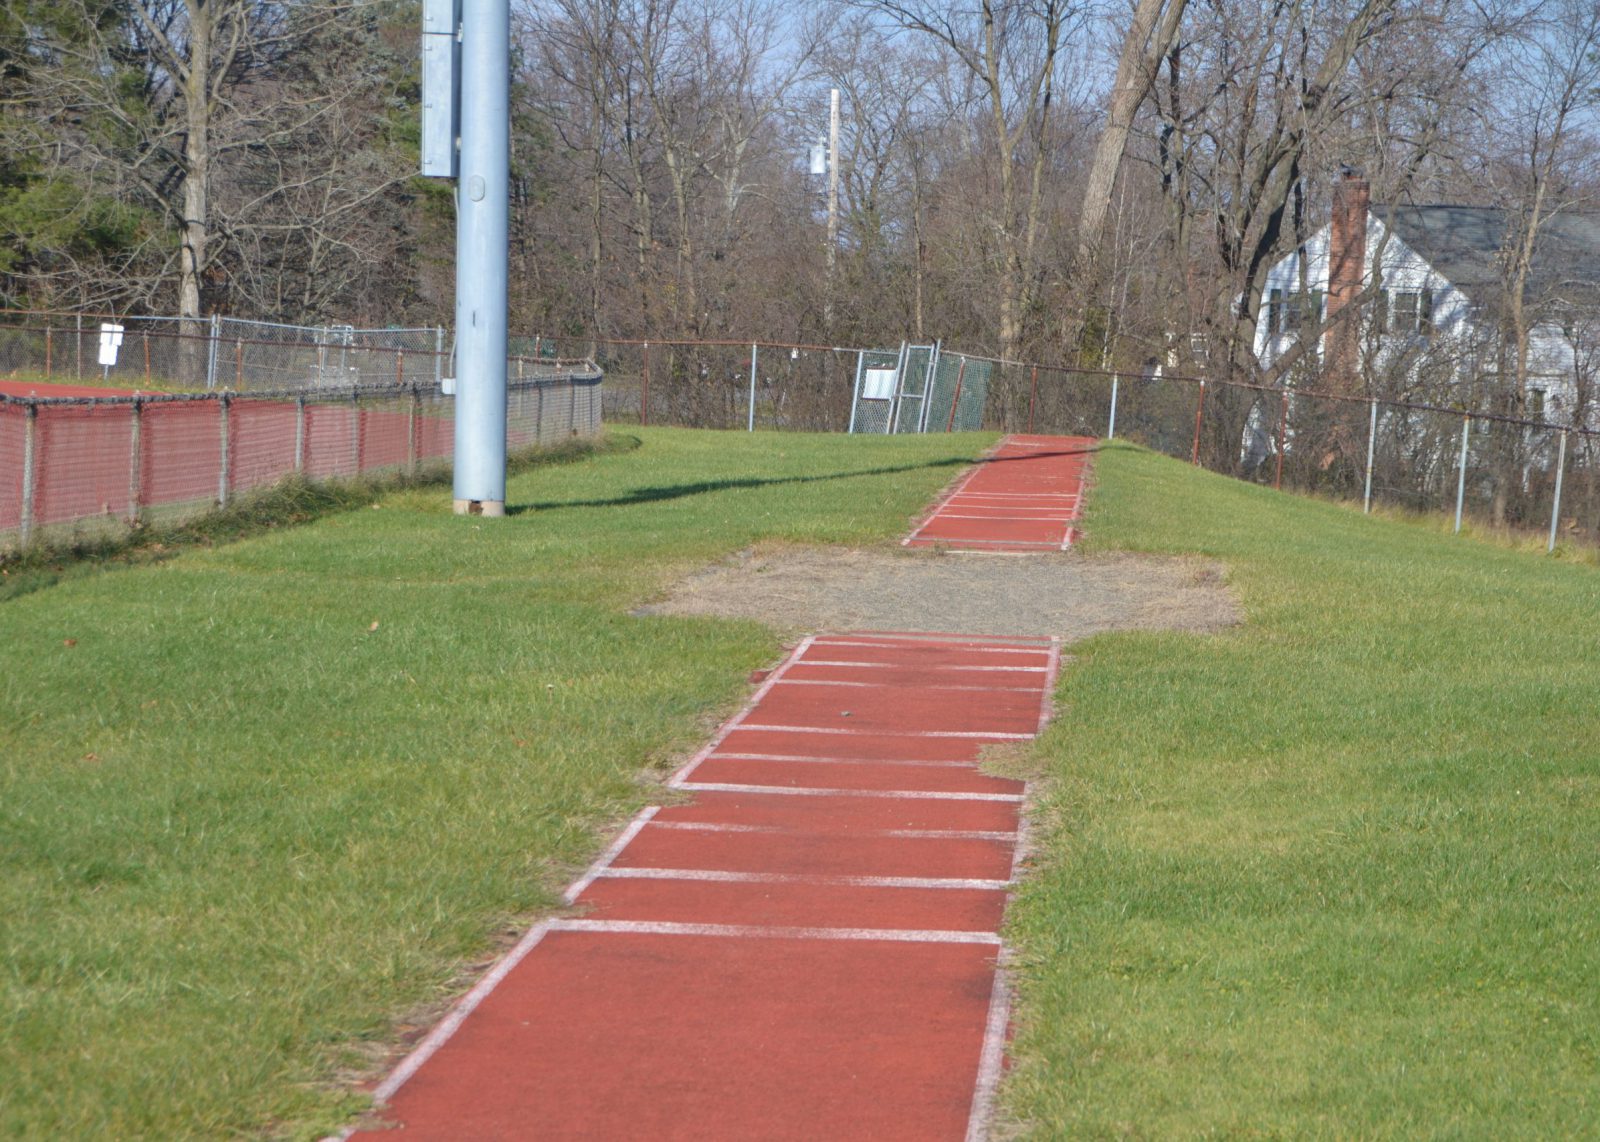 High School track conditions